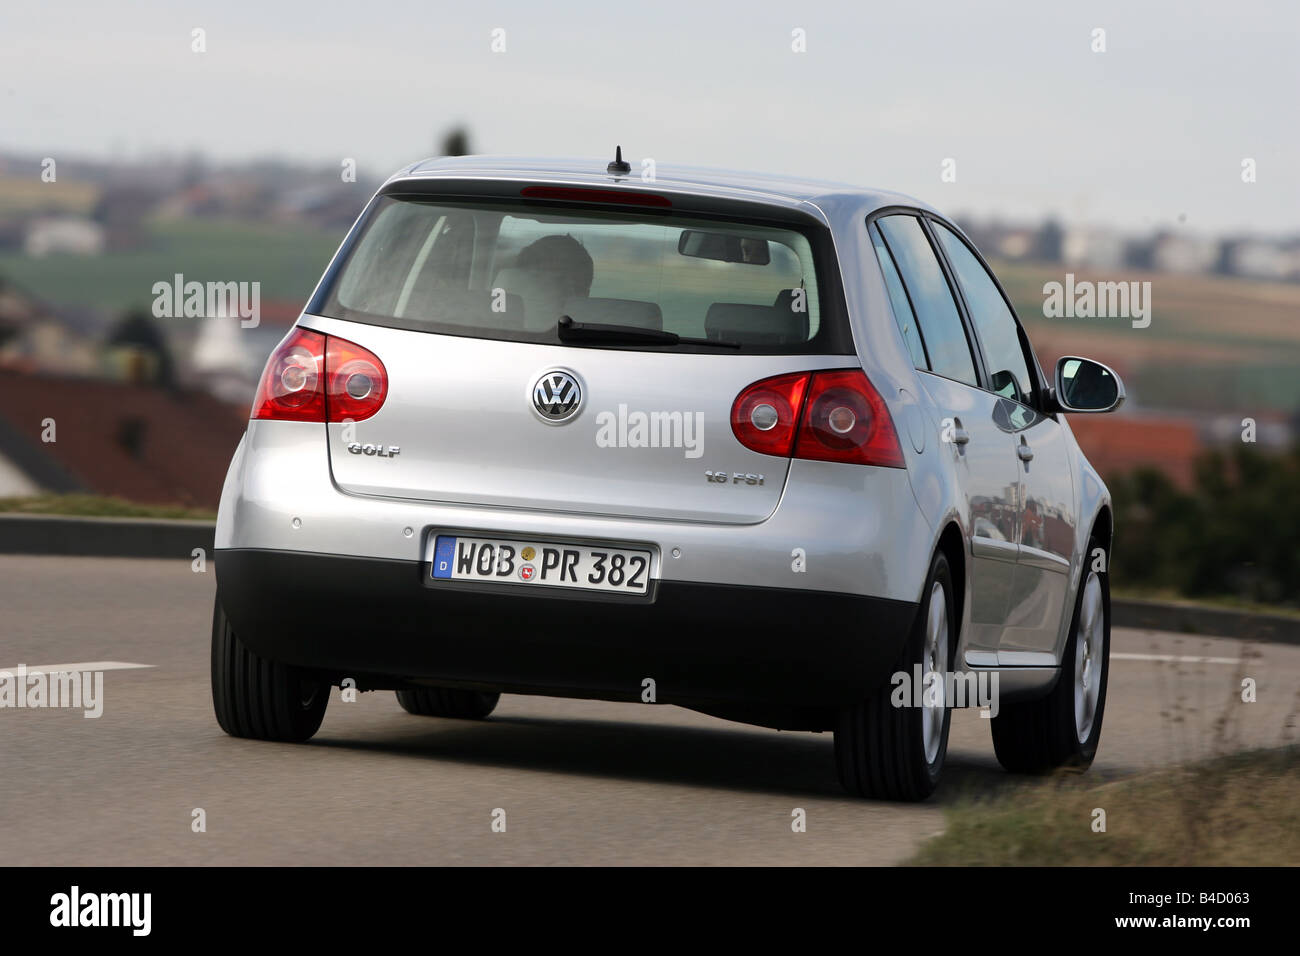 Vw Golf 6 High Resolution Stock Photography and Images - Alamy